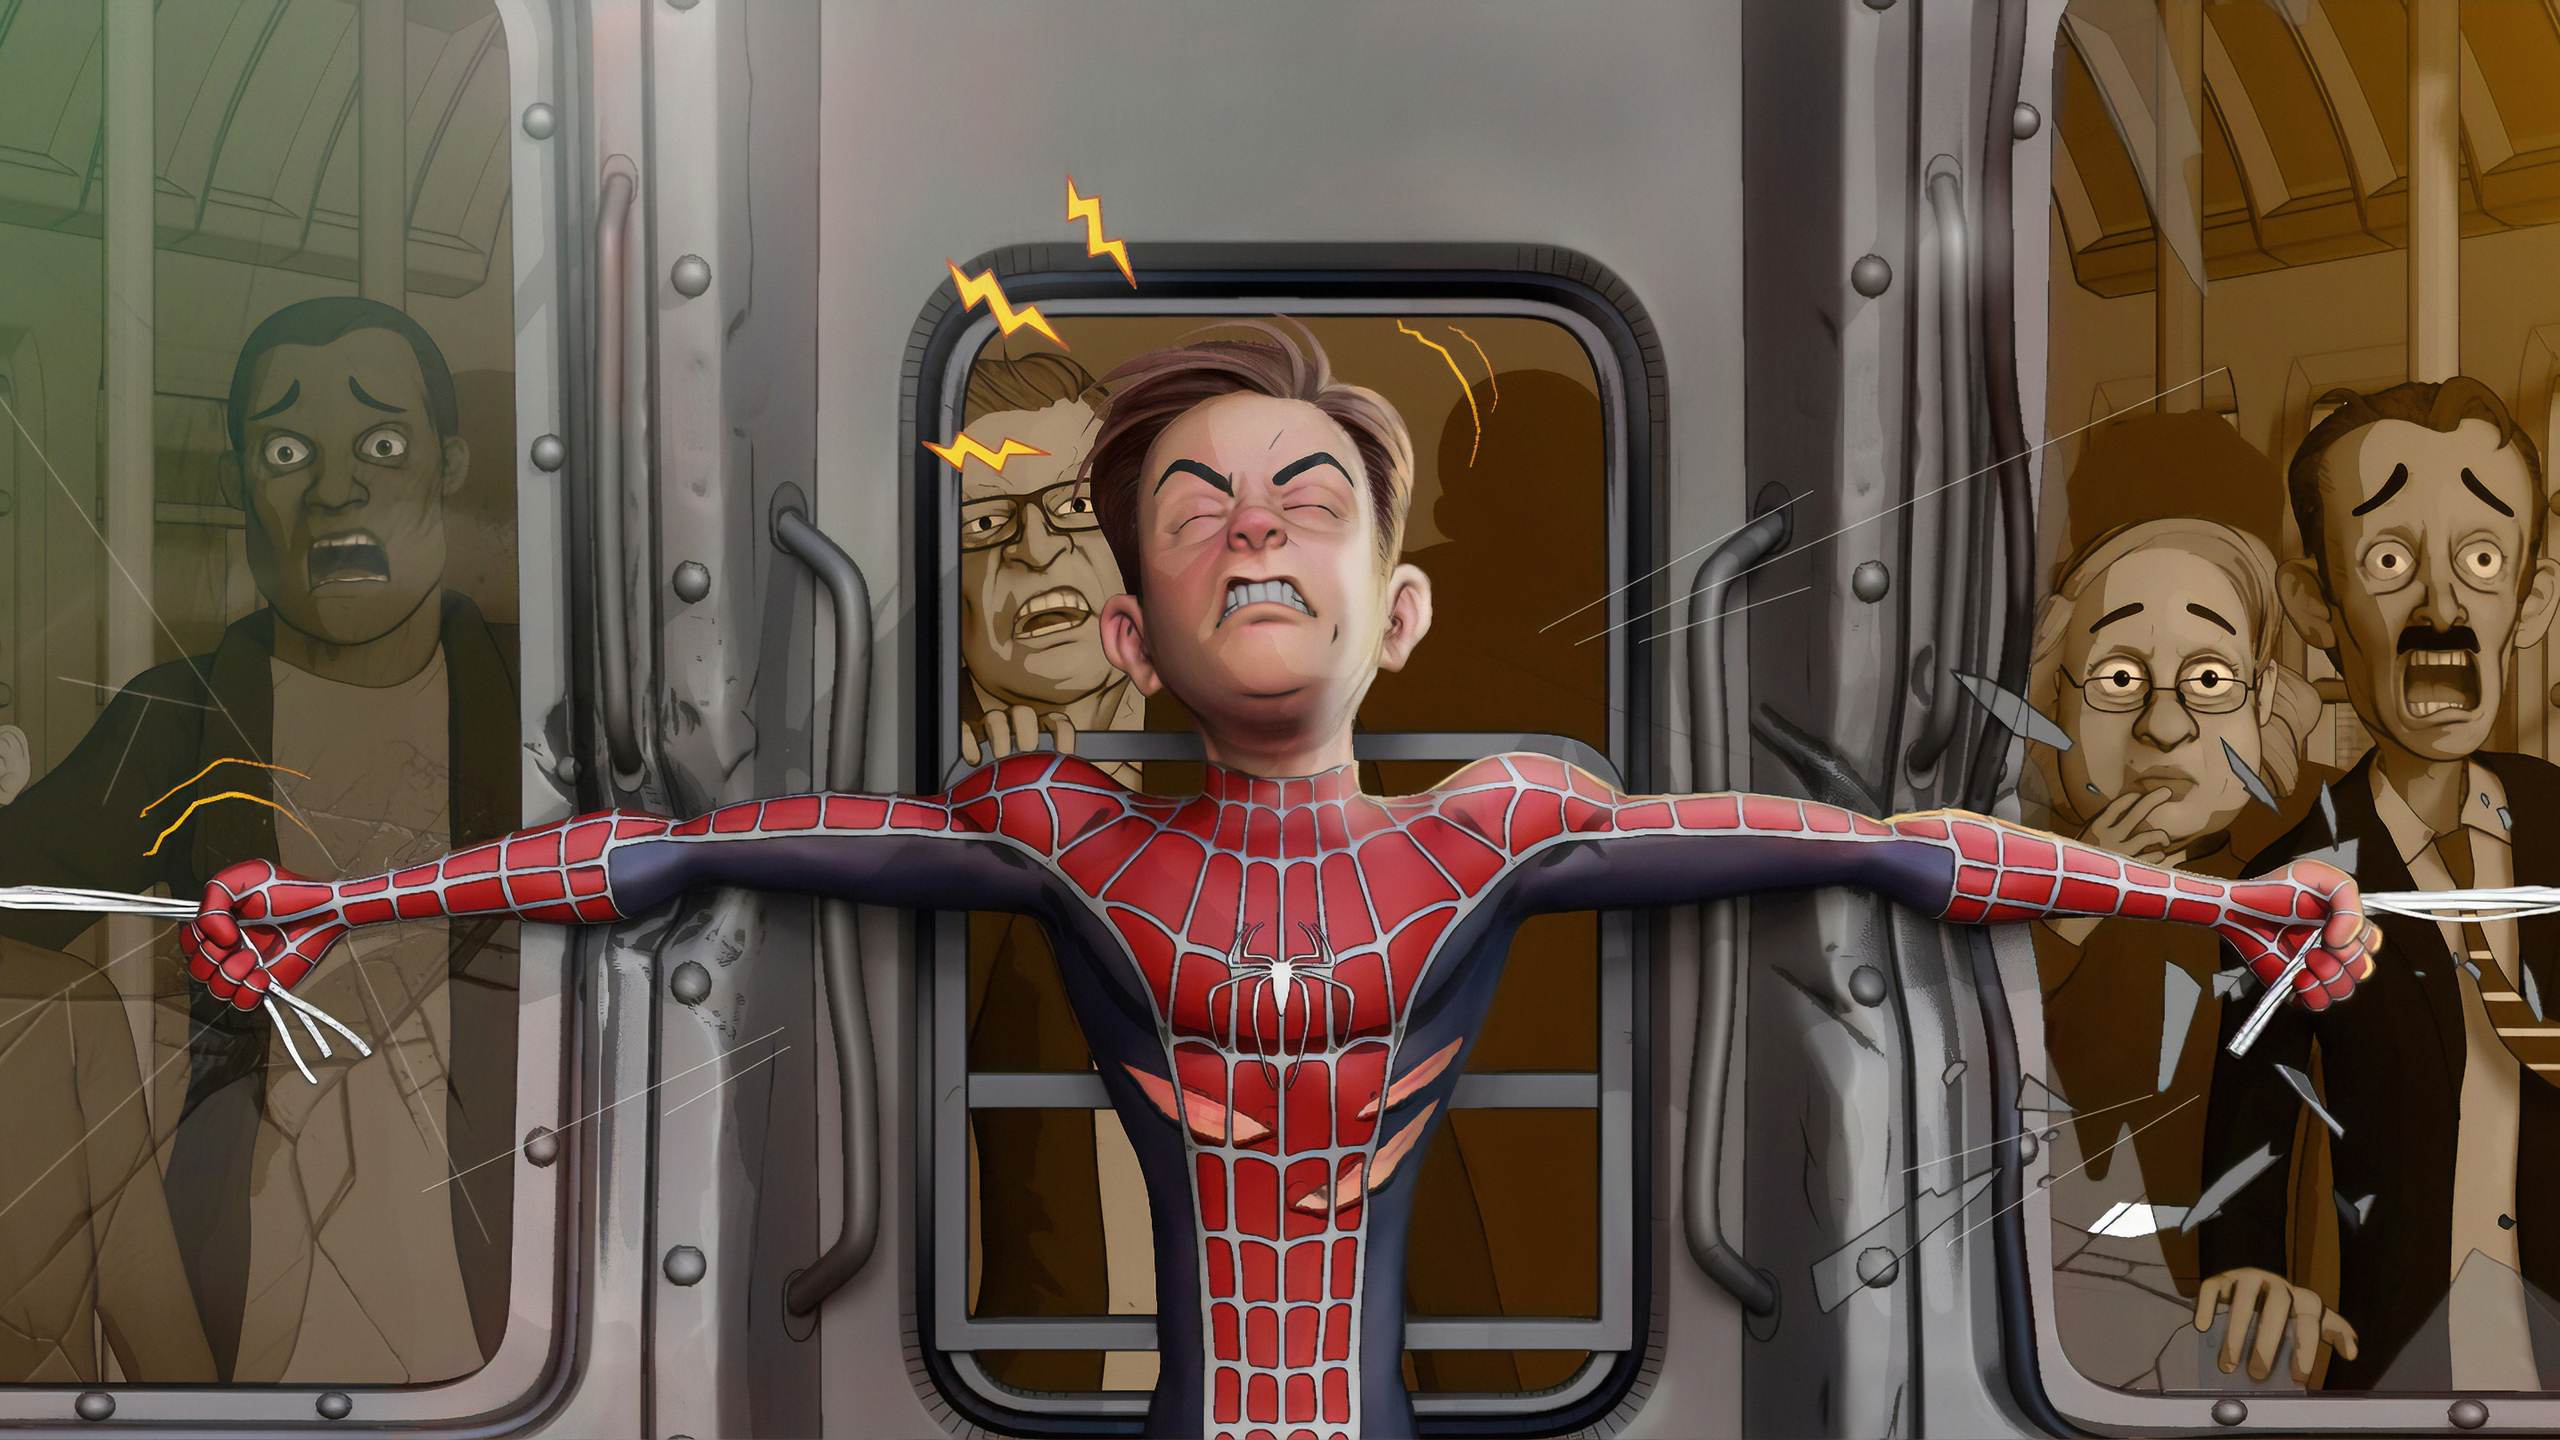 2560x1440-spiderman-stoping-train-1440p-resolution-hd-4k-wallpapers